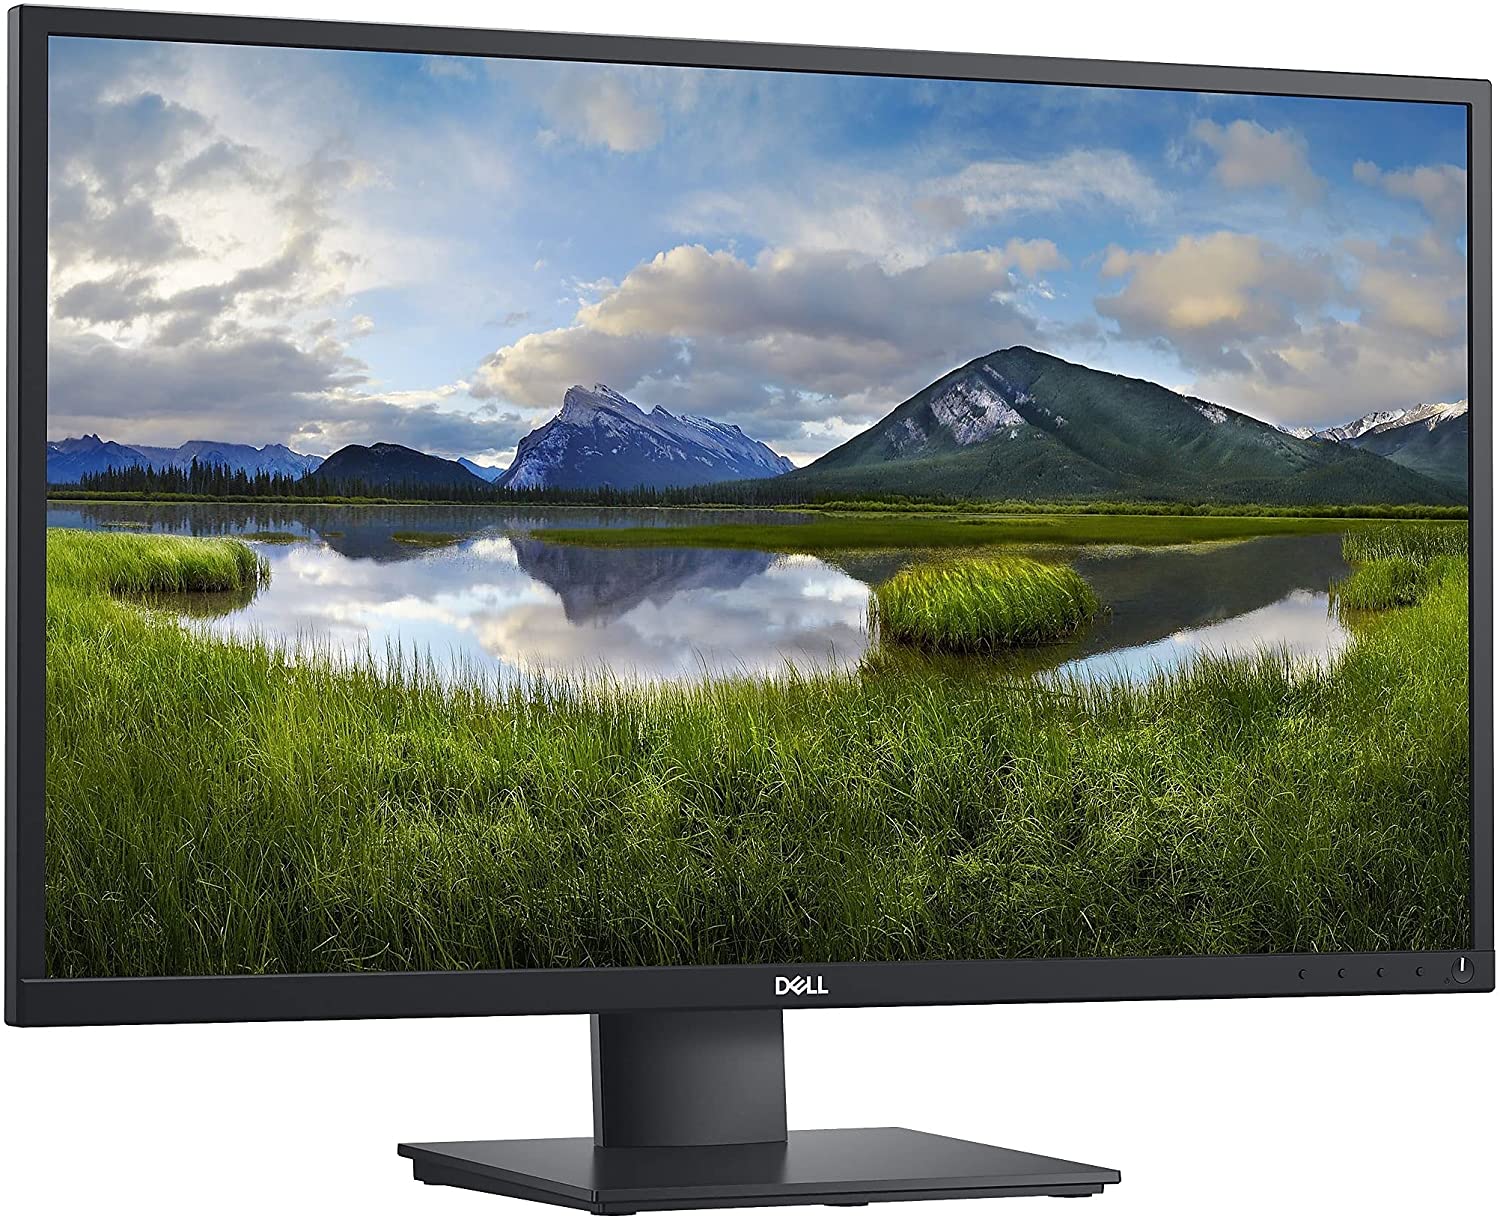 Dell E2720H 27" LCD Anti-Glare Monitor - 1920 x 1080 Full HD Display - 60 Hz Refresh Rate - VGA & HDMI Input Connectors - LED Backlight Technology - in-Plane Switching Technology